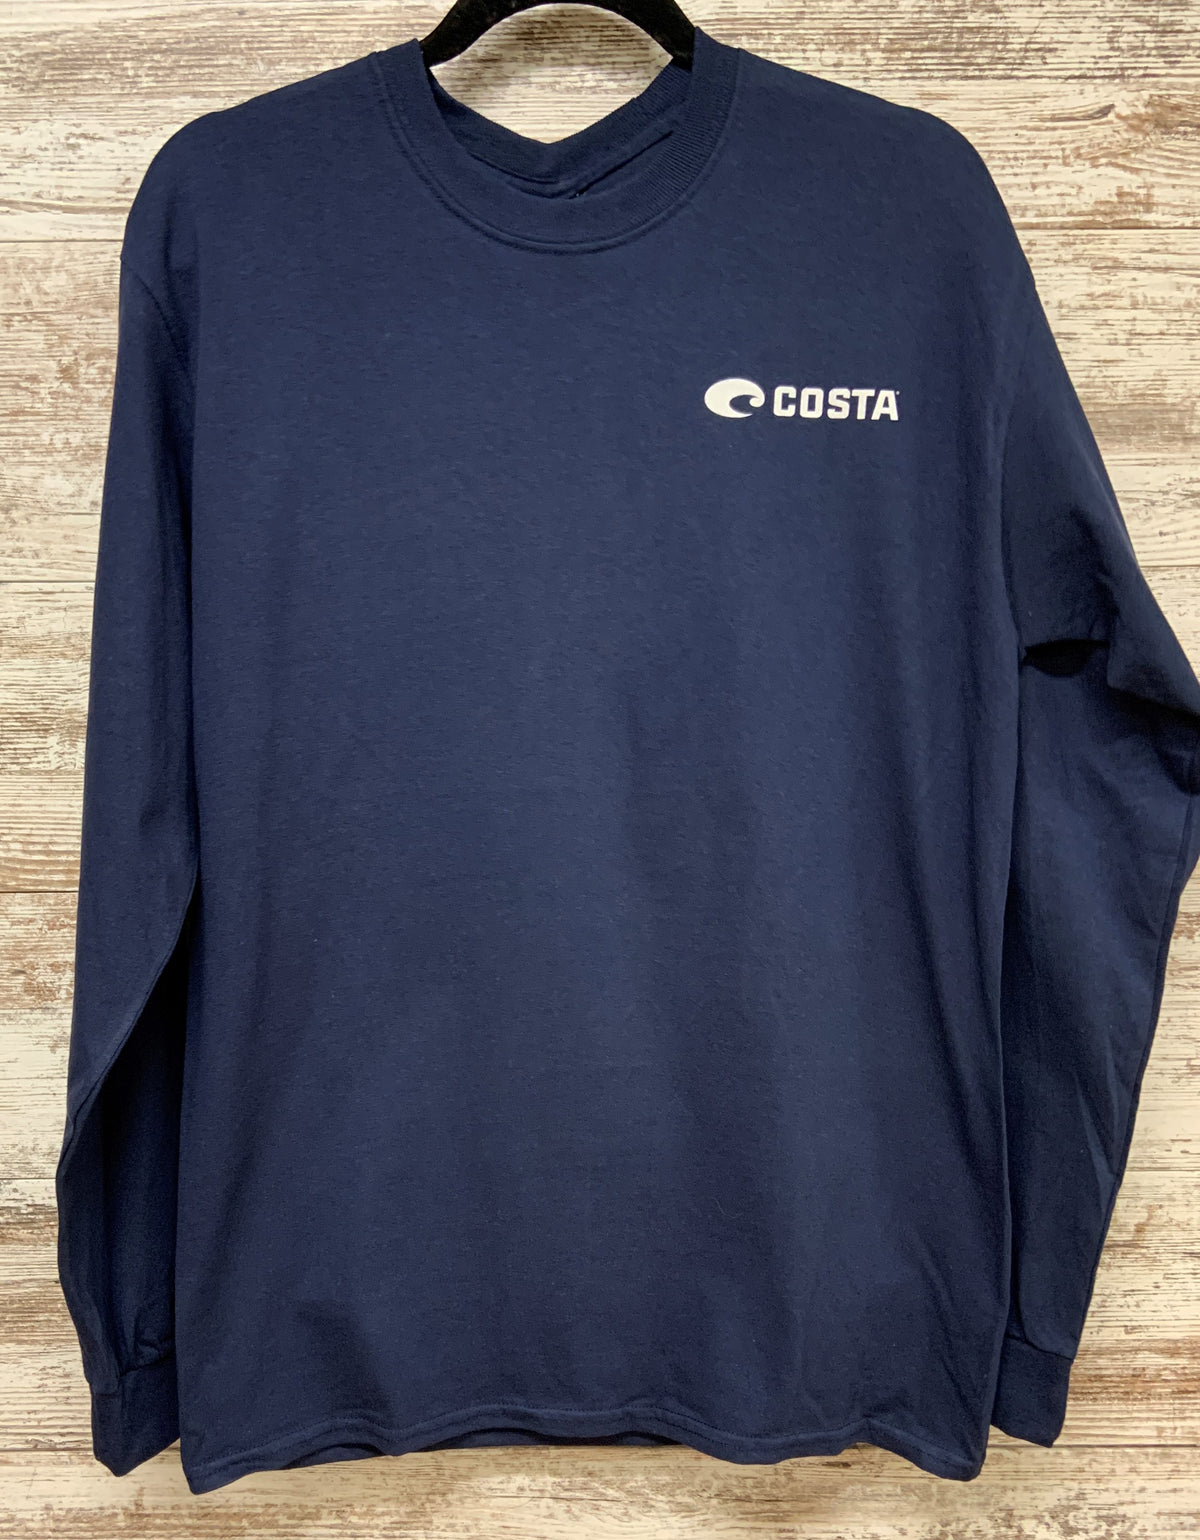 Catch Release Repeat Costa Long Sleeve